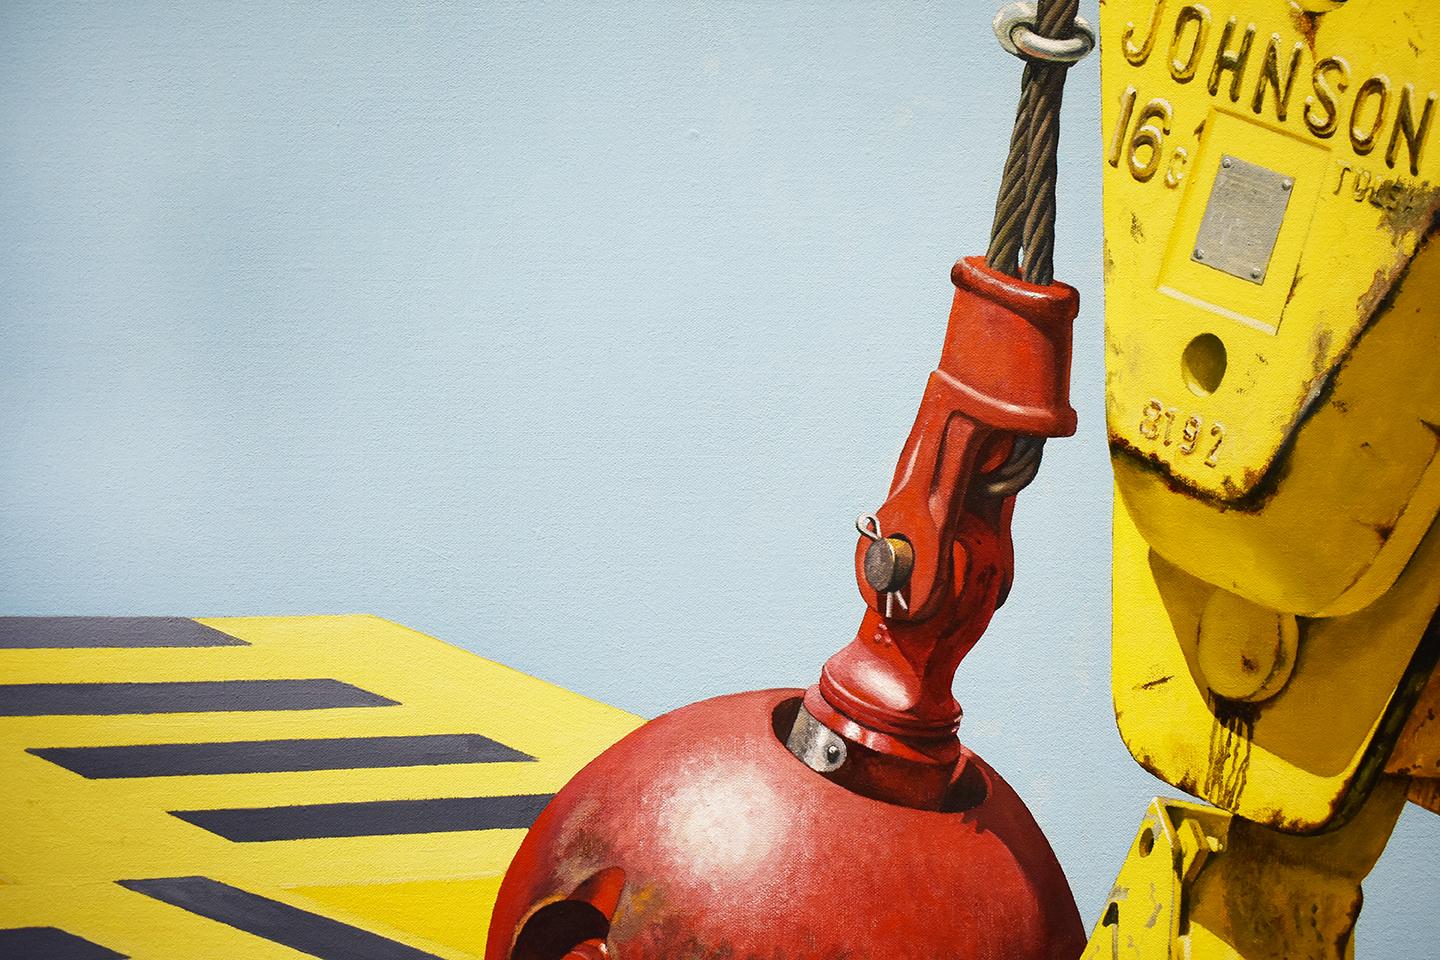 DRH Johnson (Photo-Realist Painting on Canvas of a Red & Yellow Hook on Blue) 7